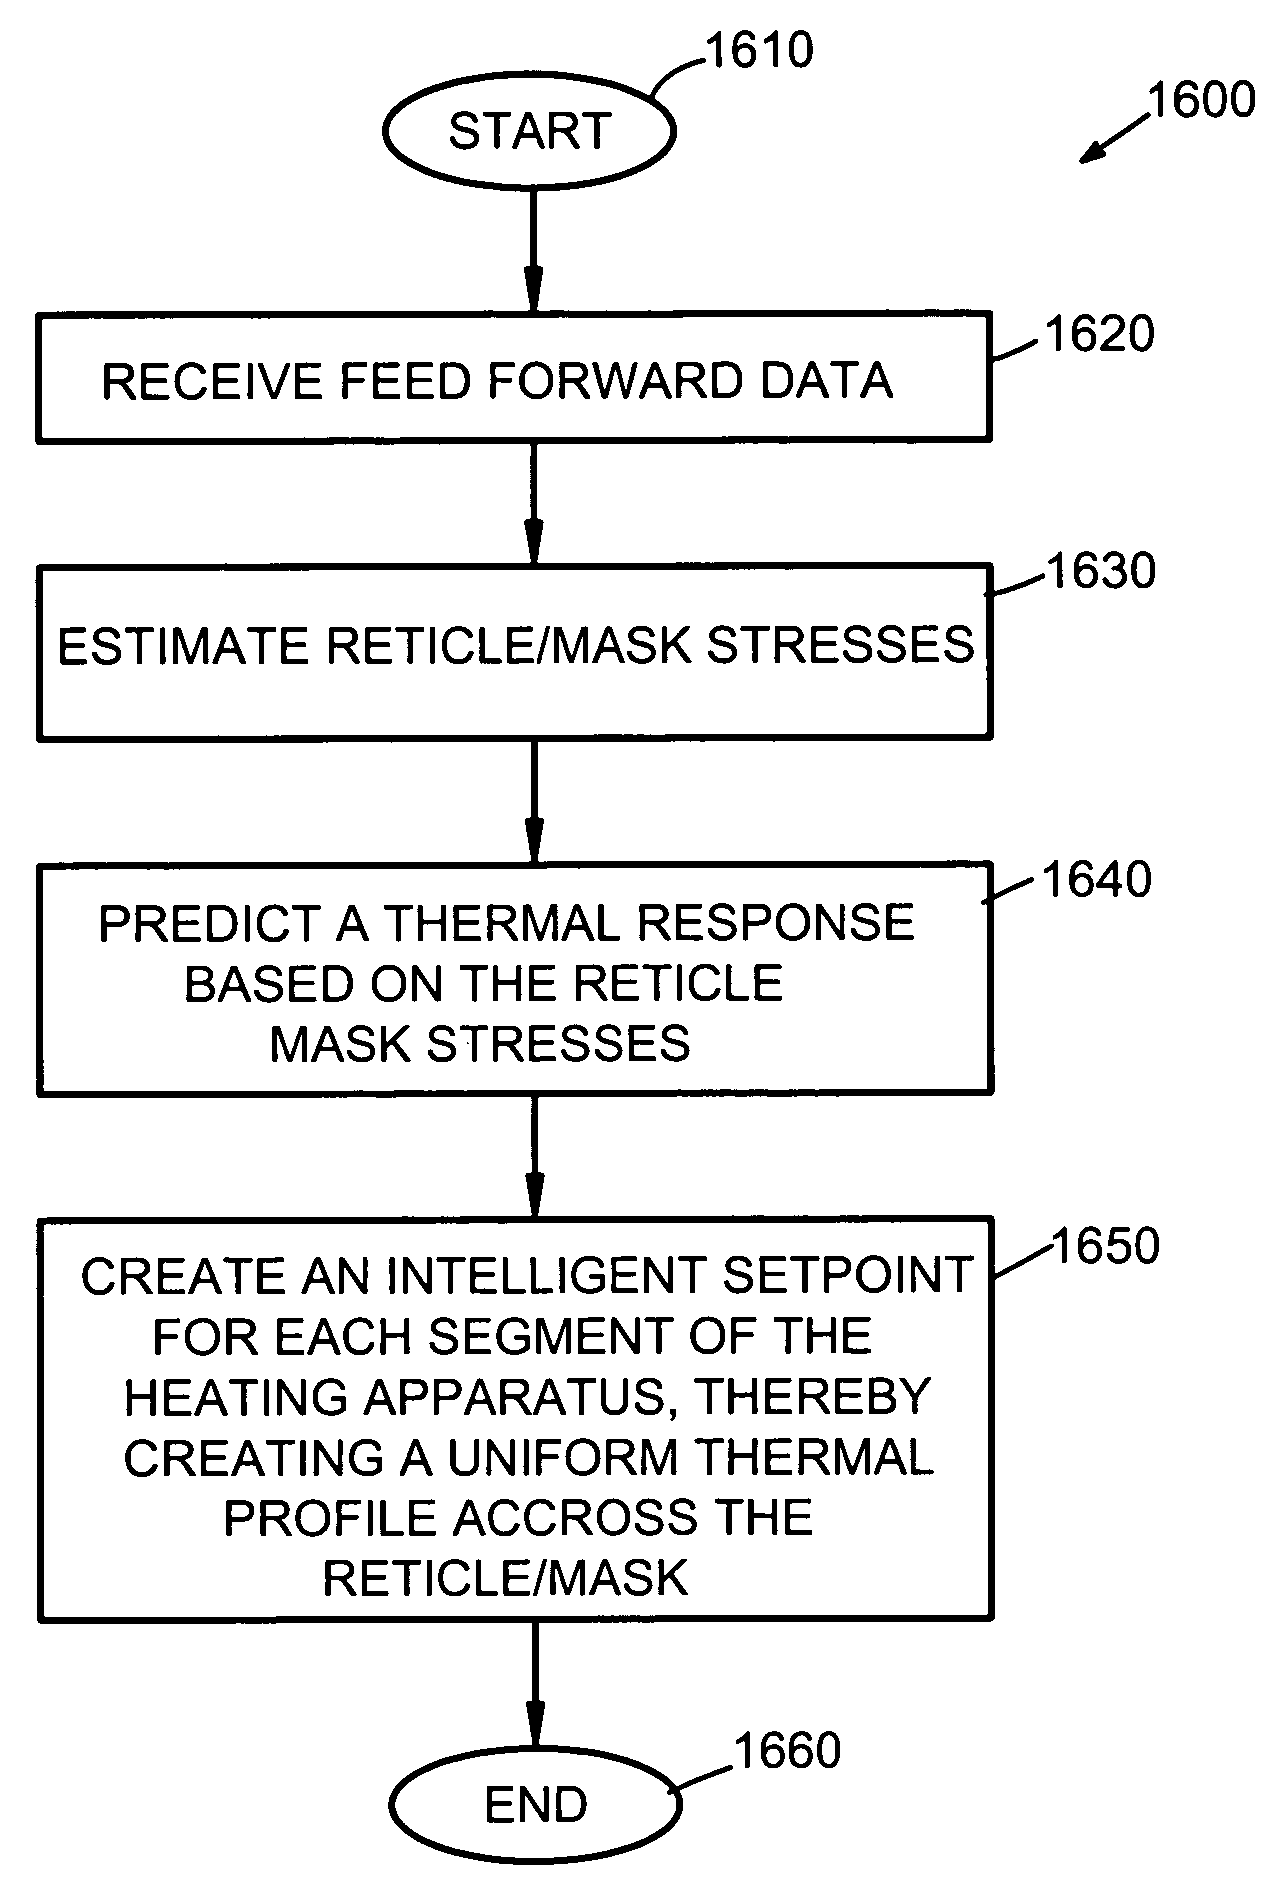 Adaptive real time control of a reticle/mask system